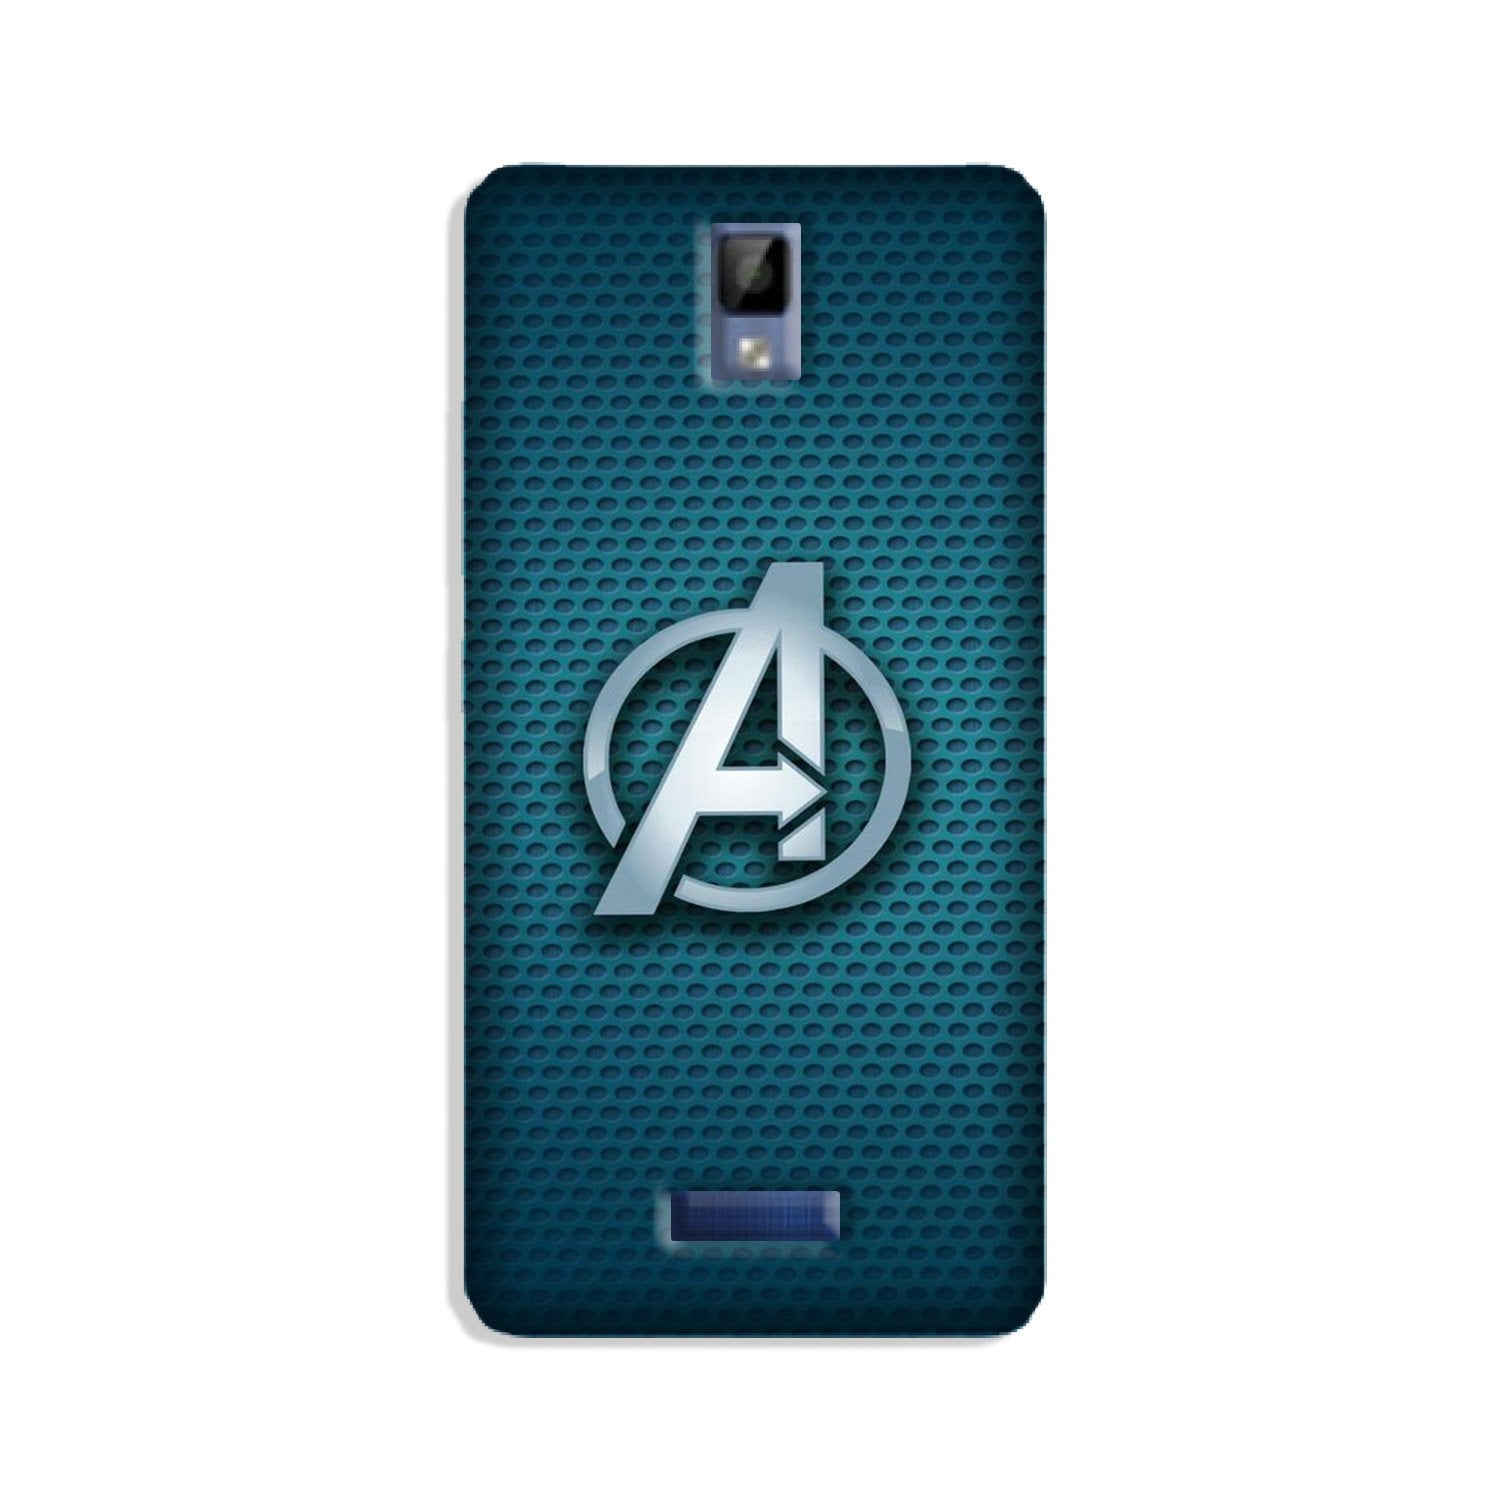 Avengers Case for Gionee P7 (Design No. 246)